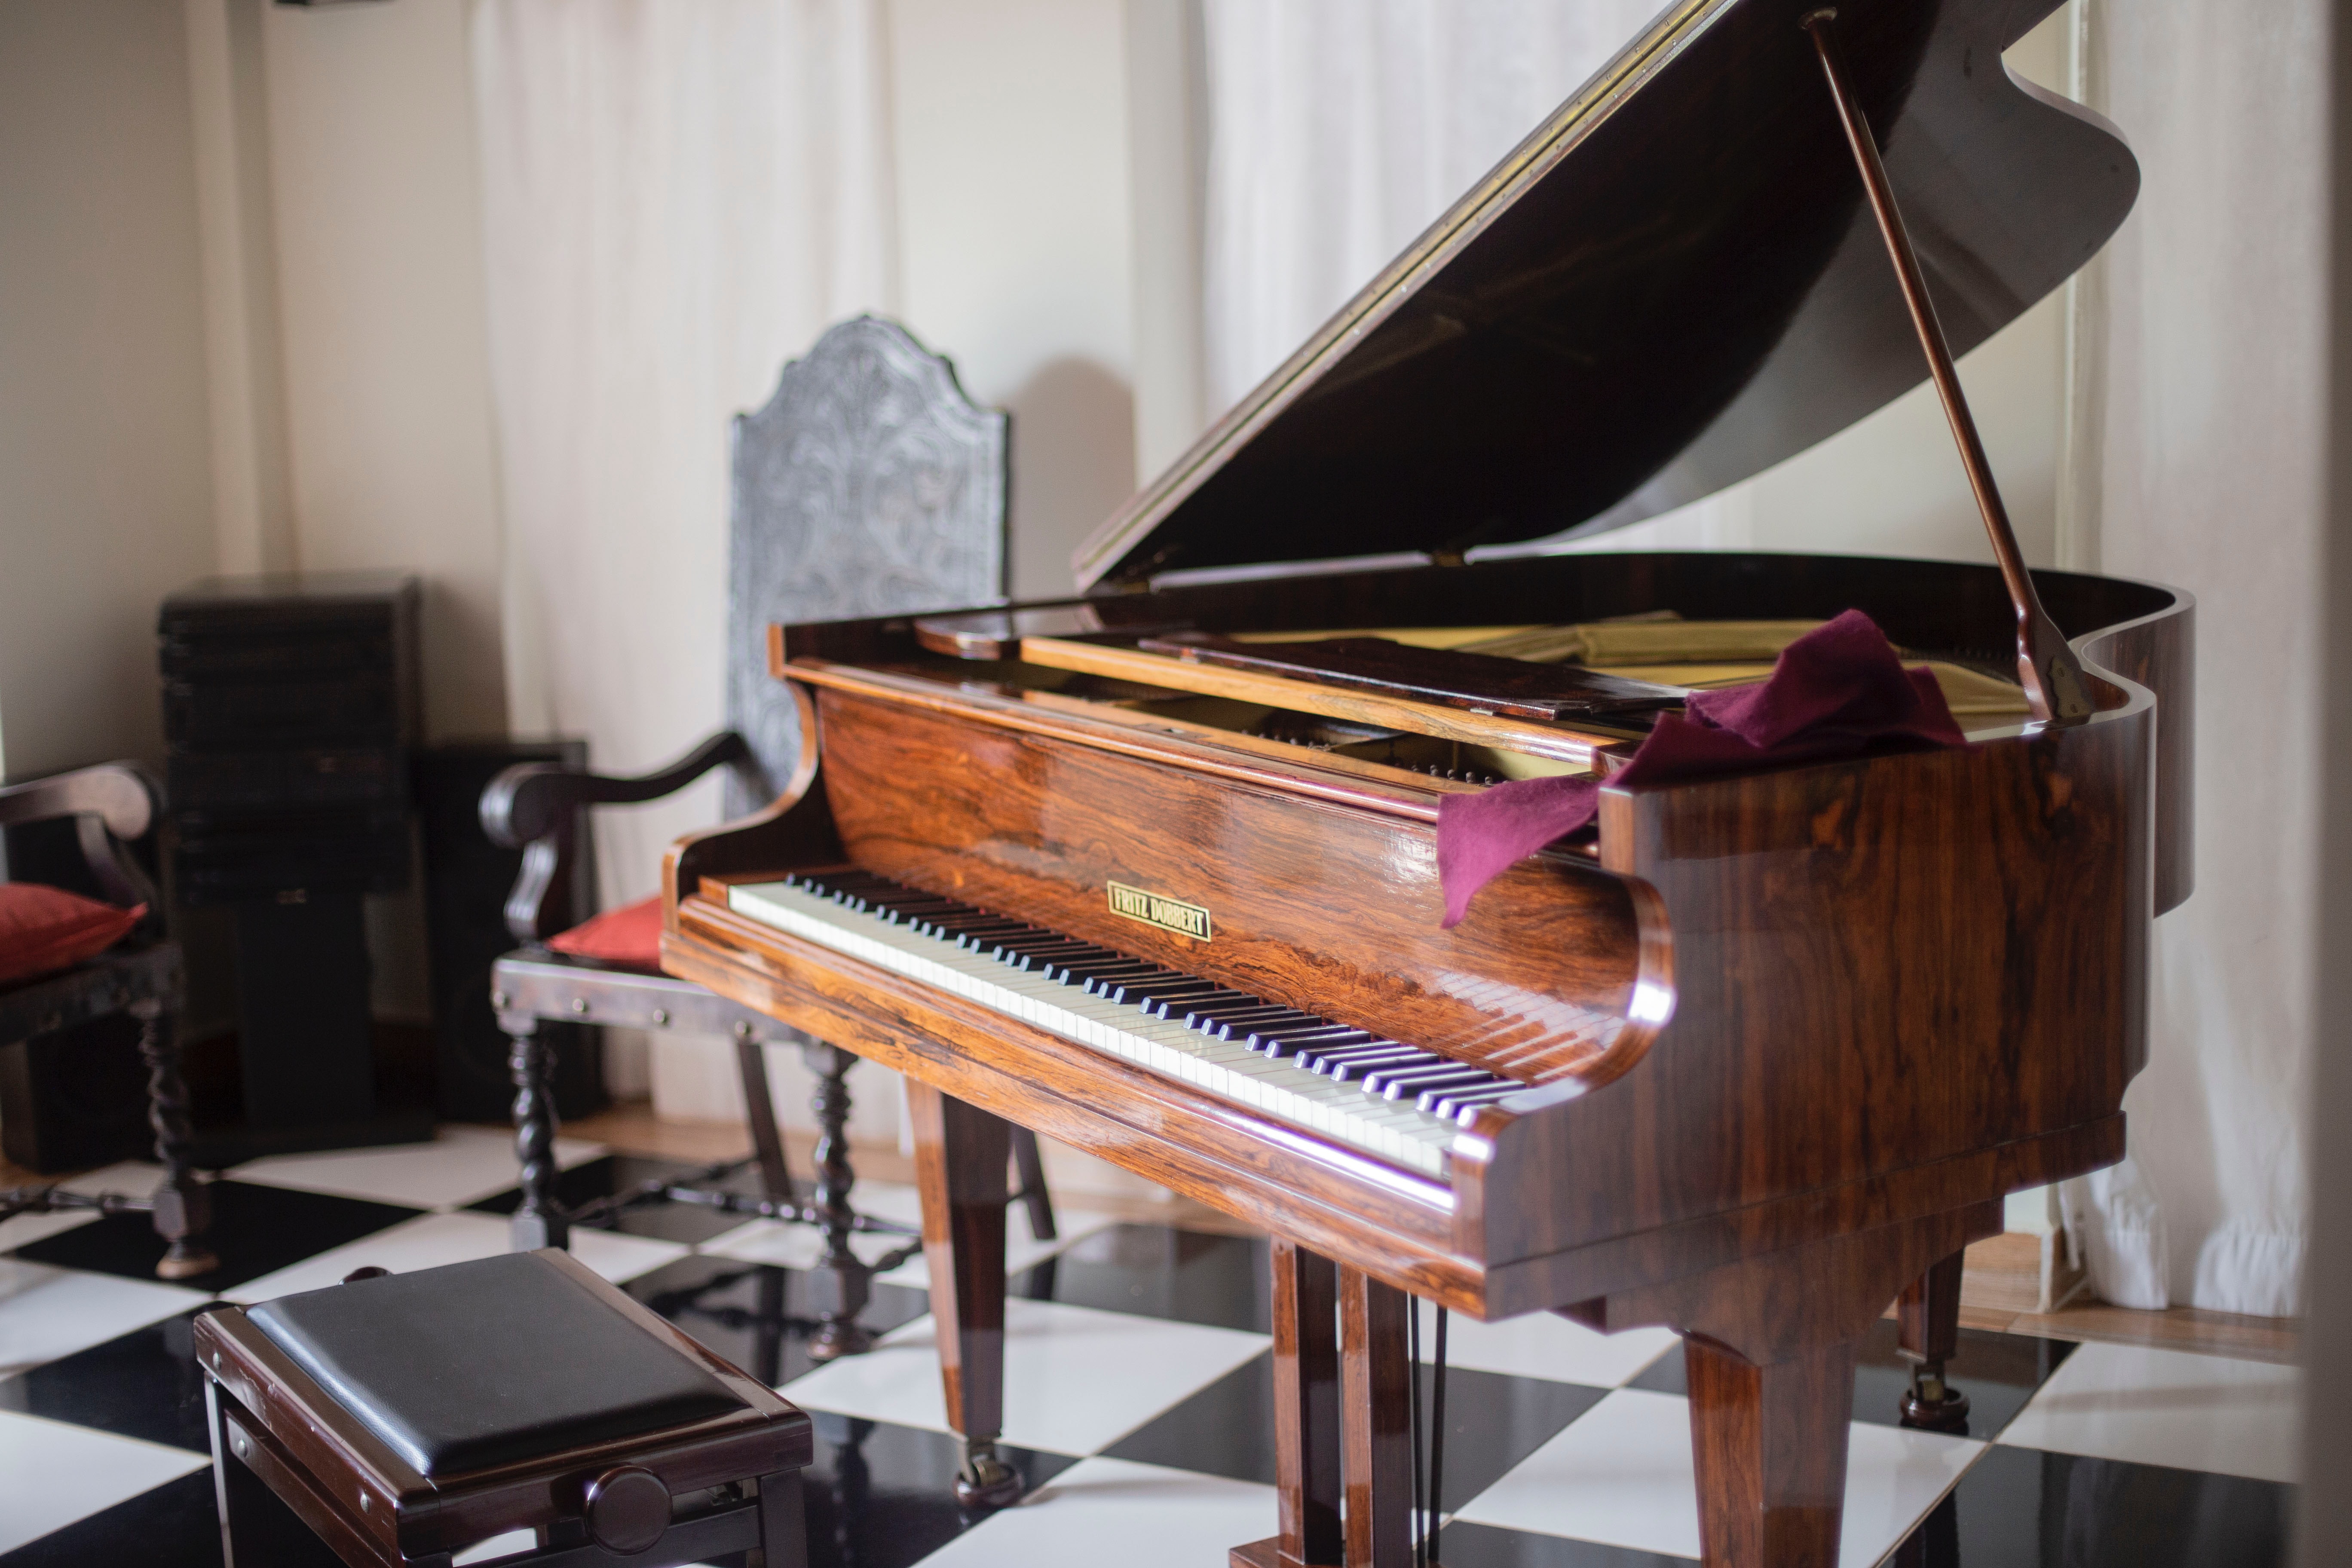 Where to find piano lessons in Oxford and what to look out for when choosing the right teacher.